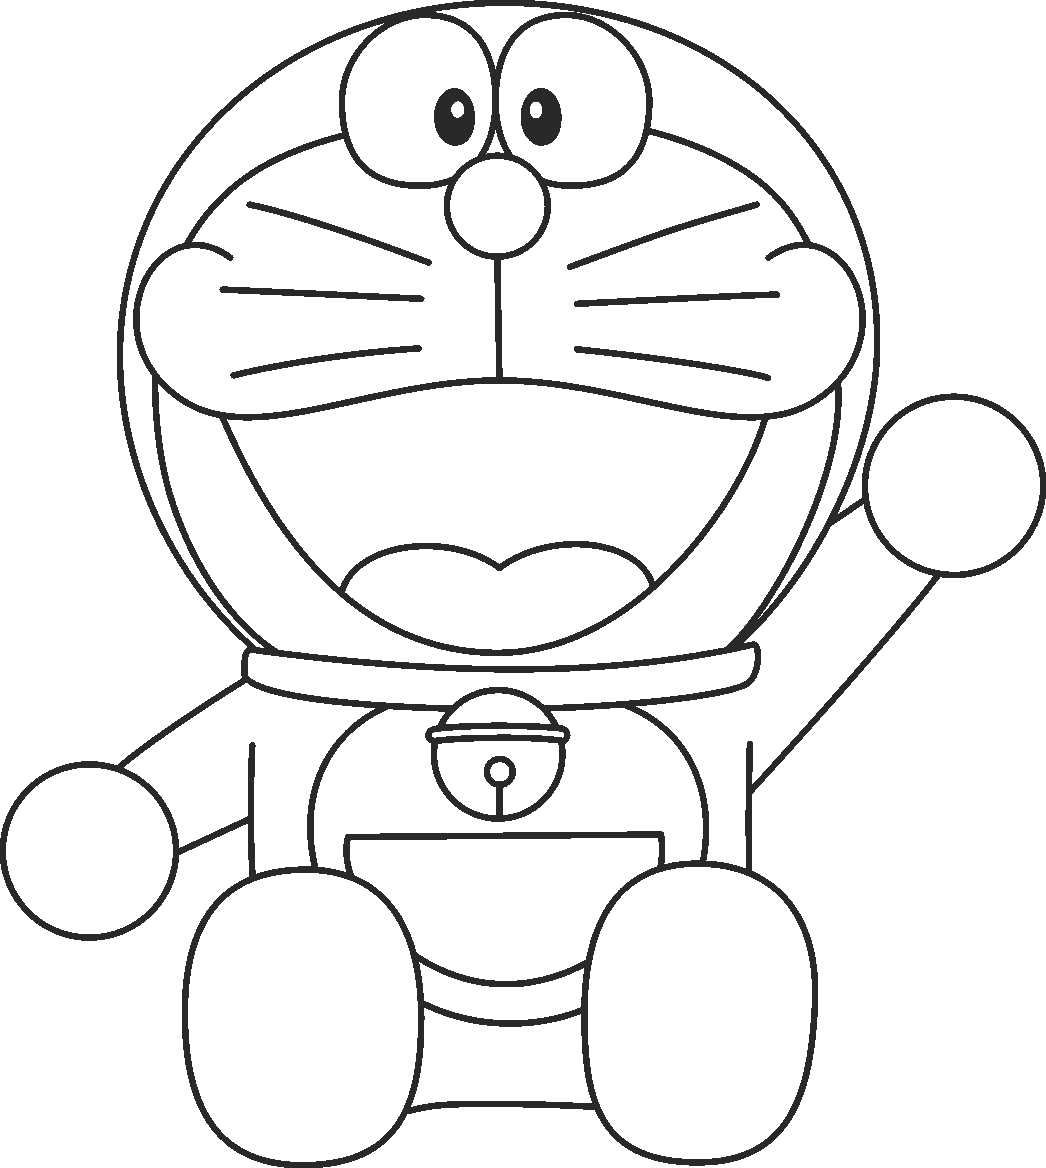 How to draw Doraemon Characters - YouTube